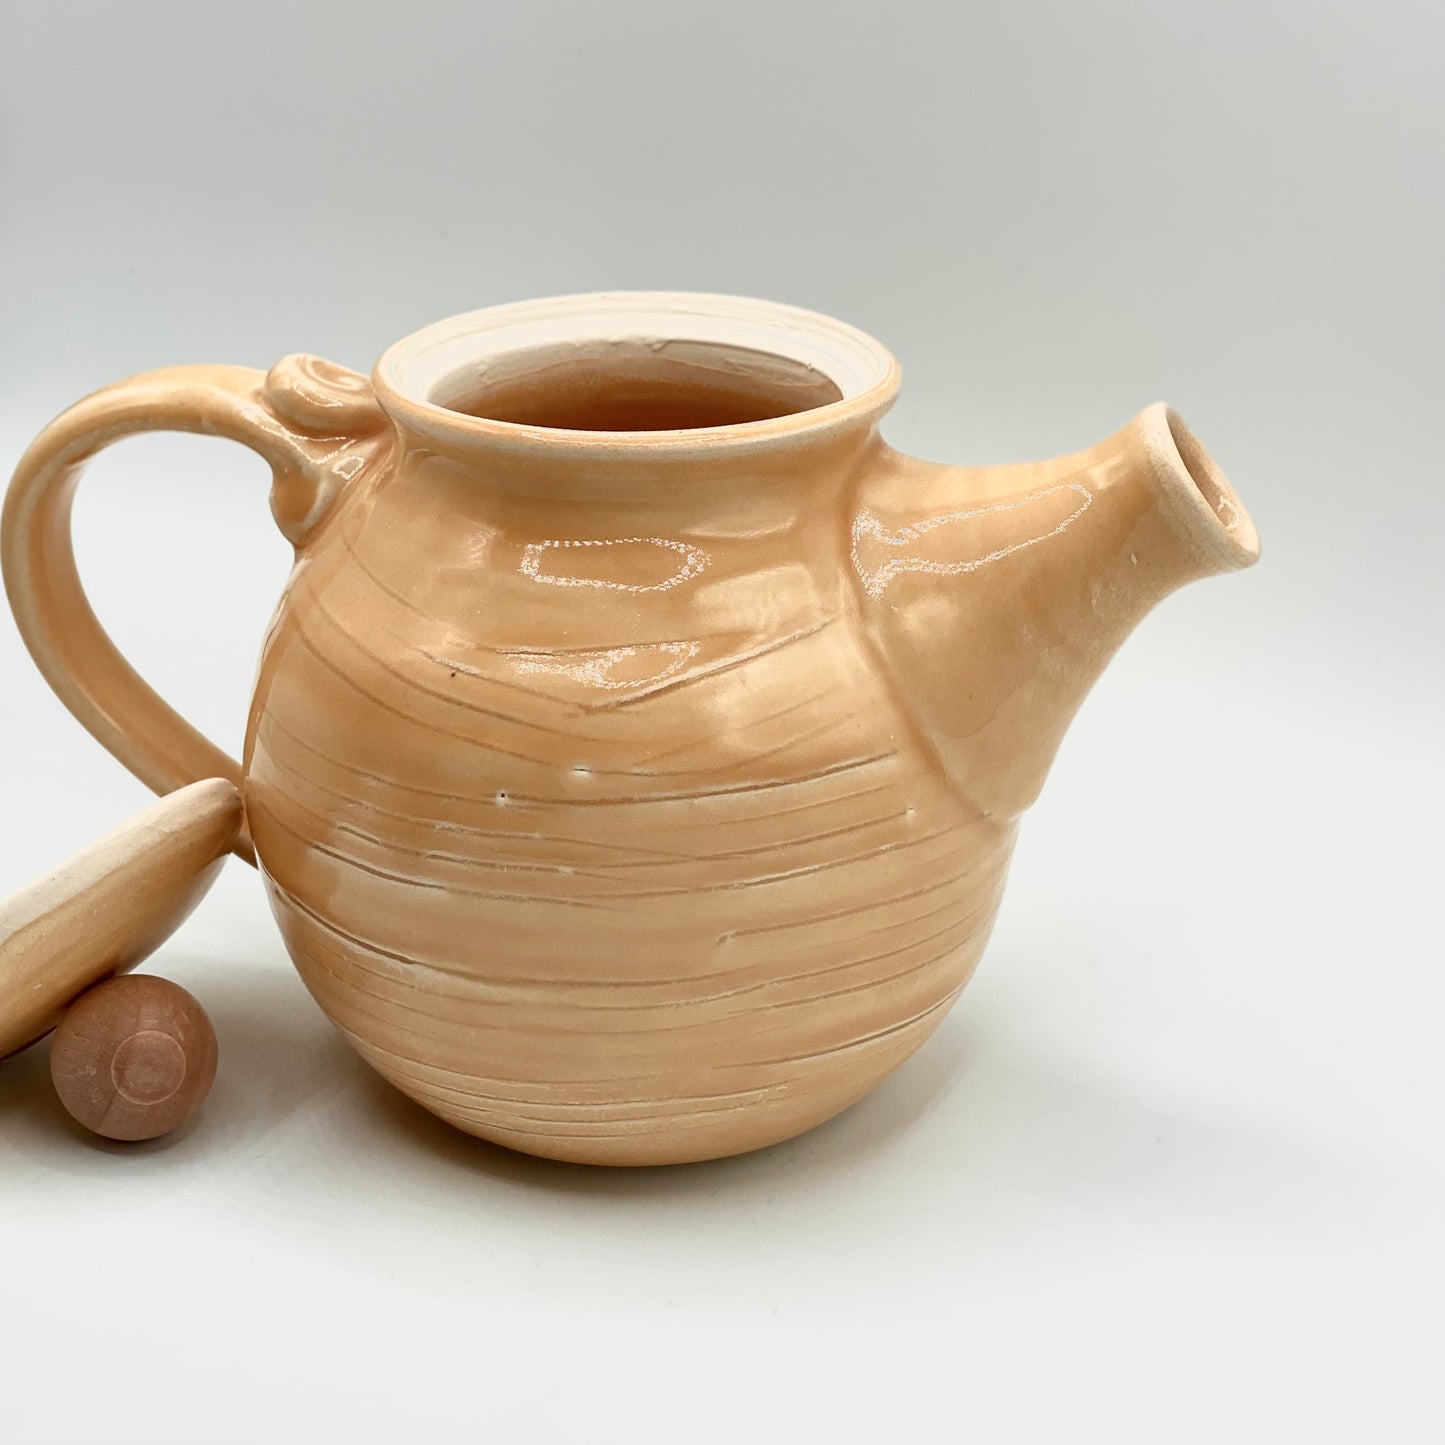 Teapot by Poterie Ginette Arsenault